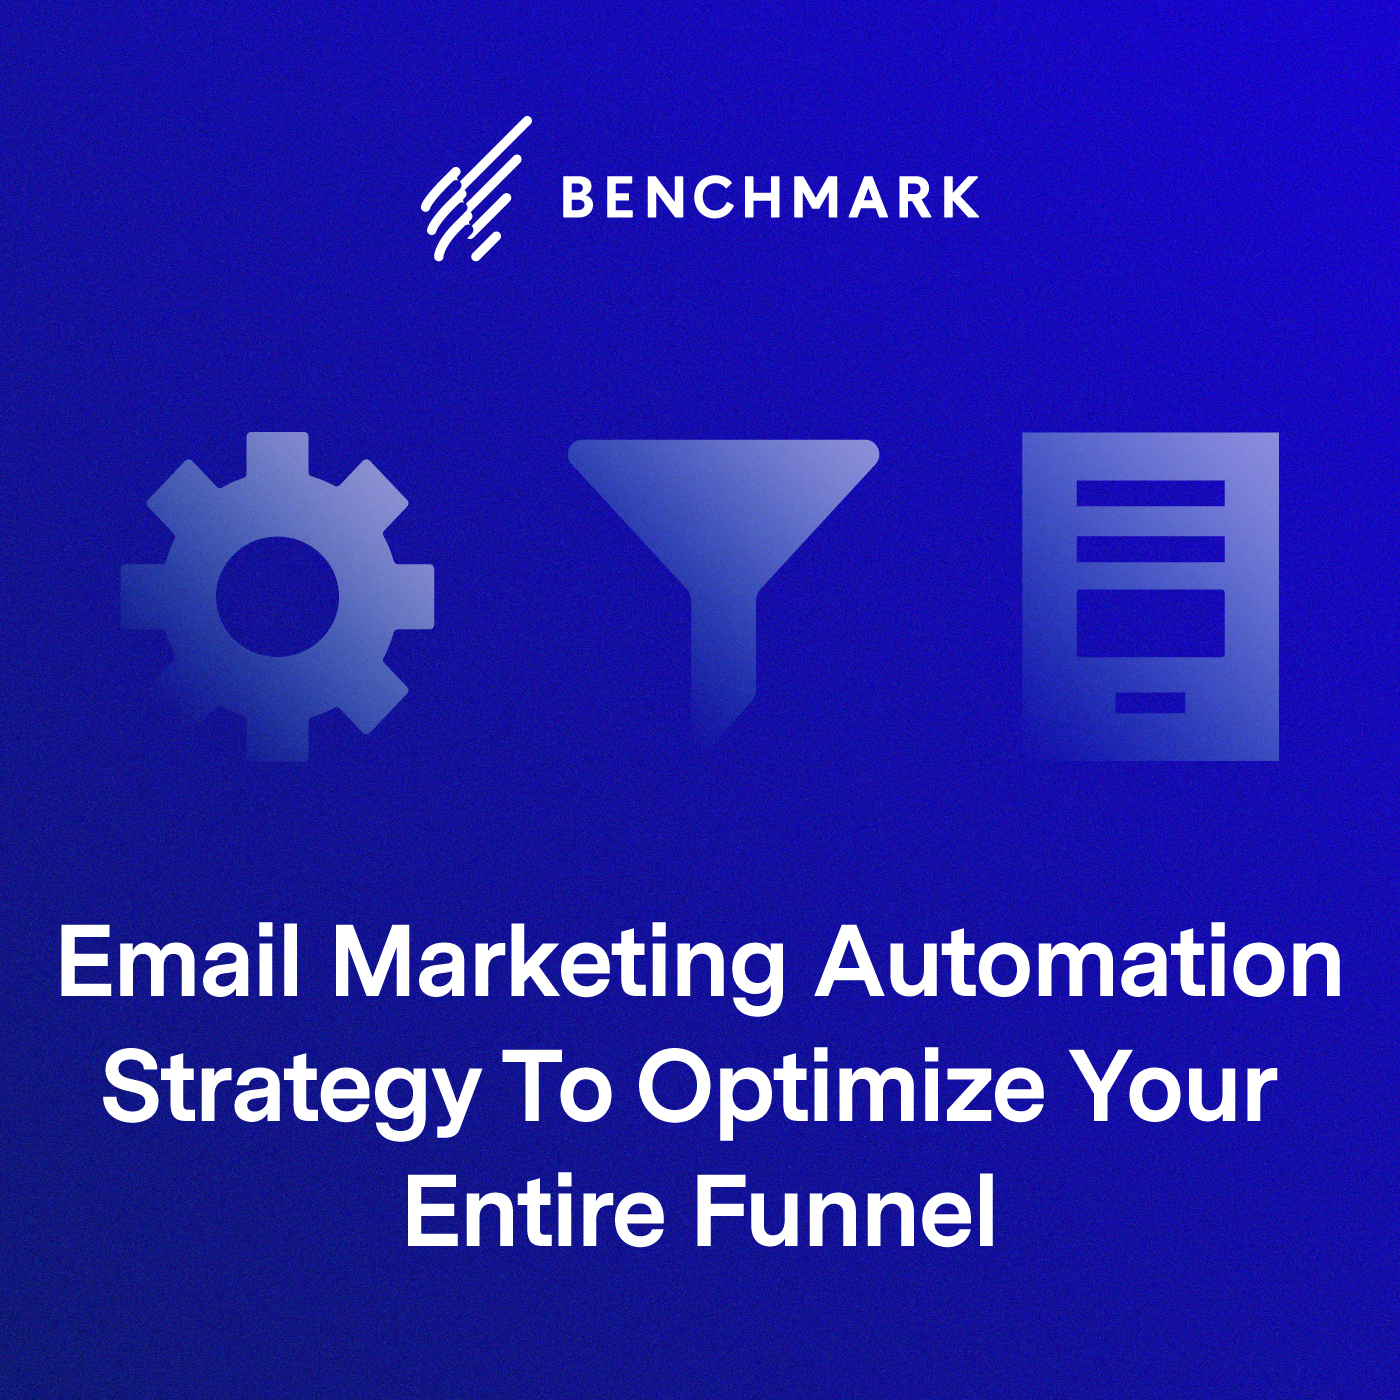 Email Marketing Automation Strategy To Optimize Your Entire Funnel